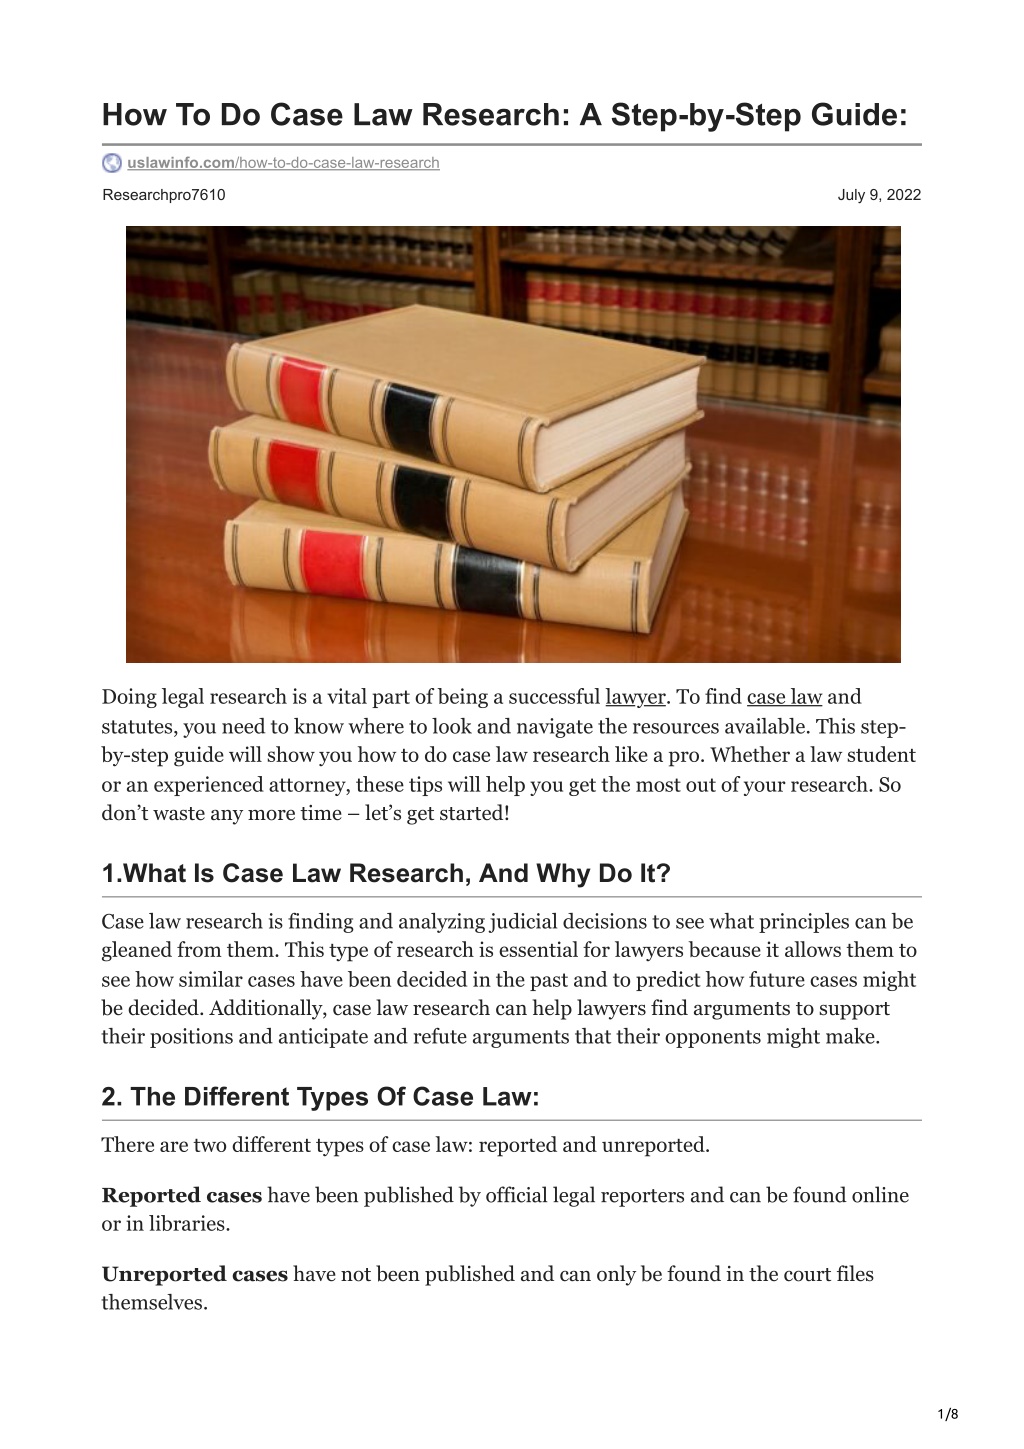 in case law research